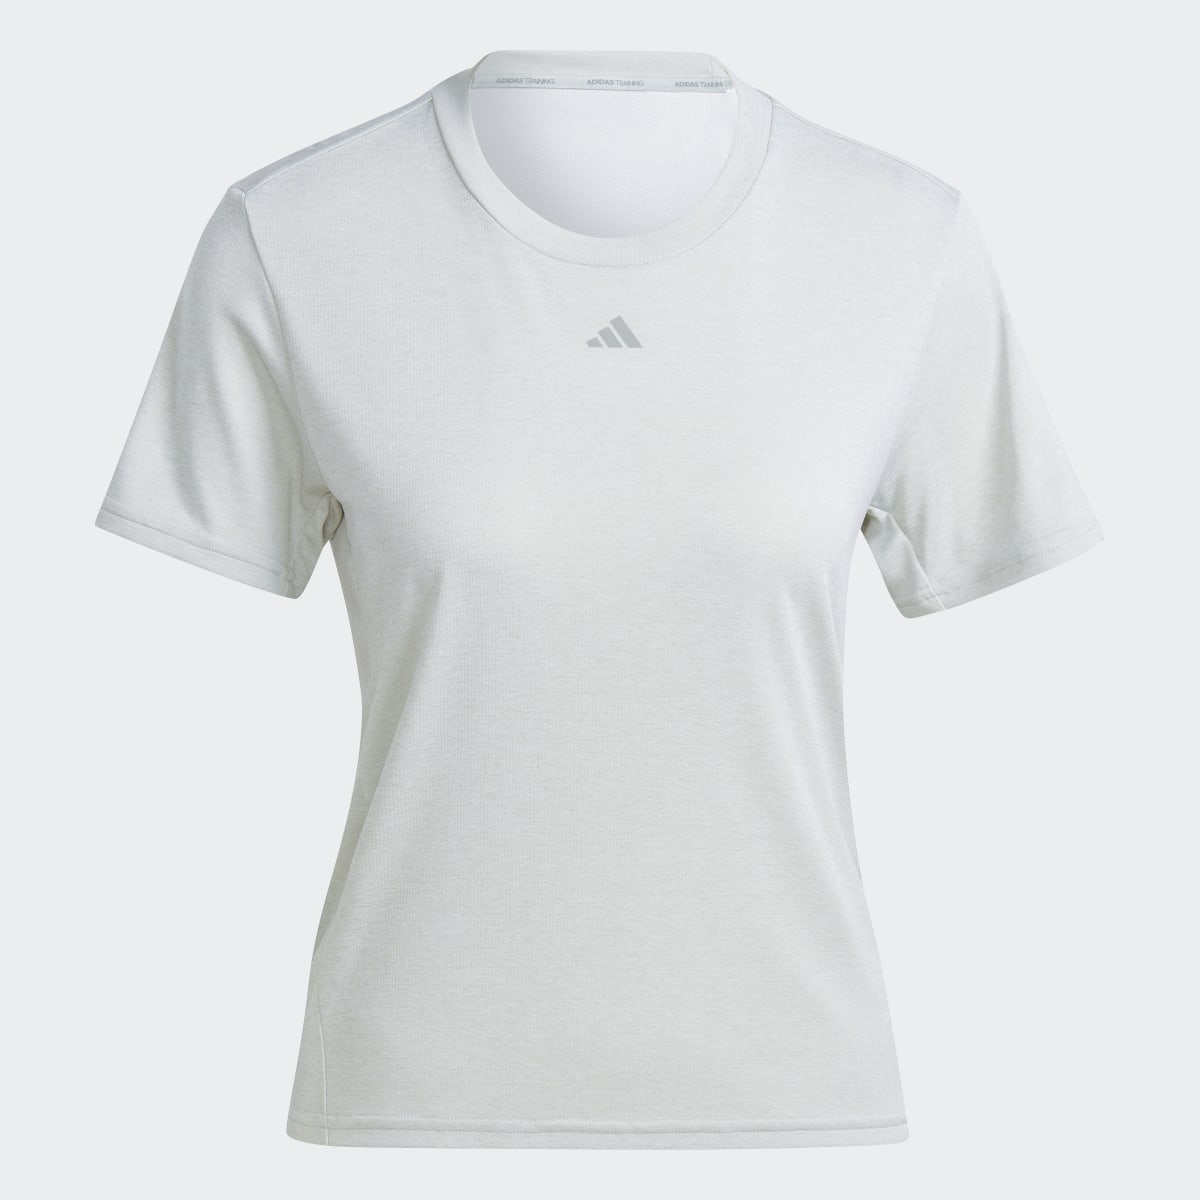 Adidas HIIT HEAT.RDY Sweat-Conceal Training T-Shirt. 5